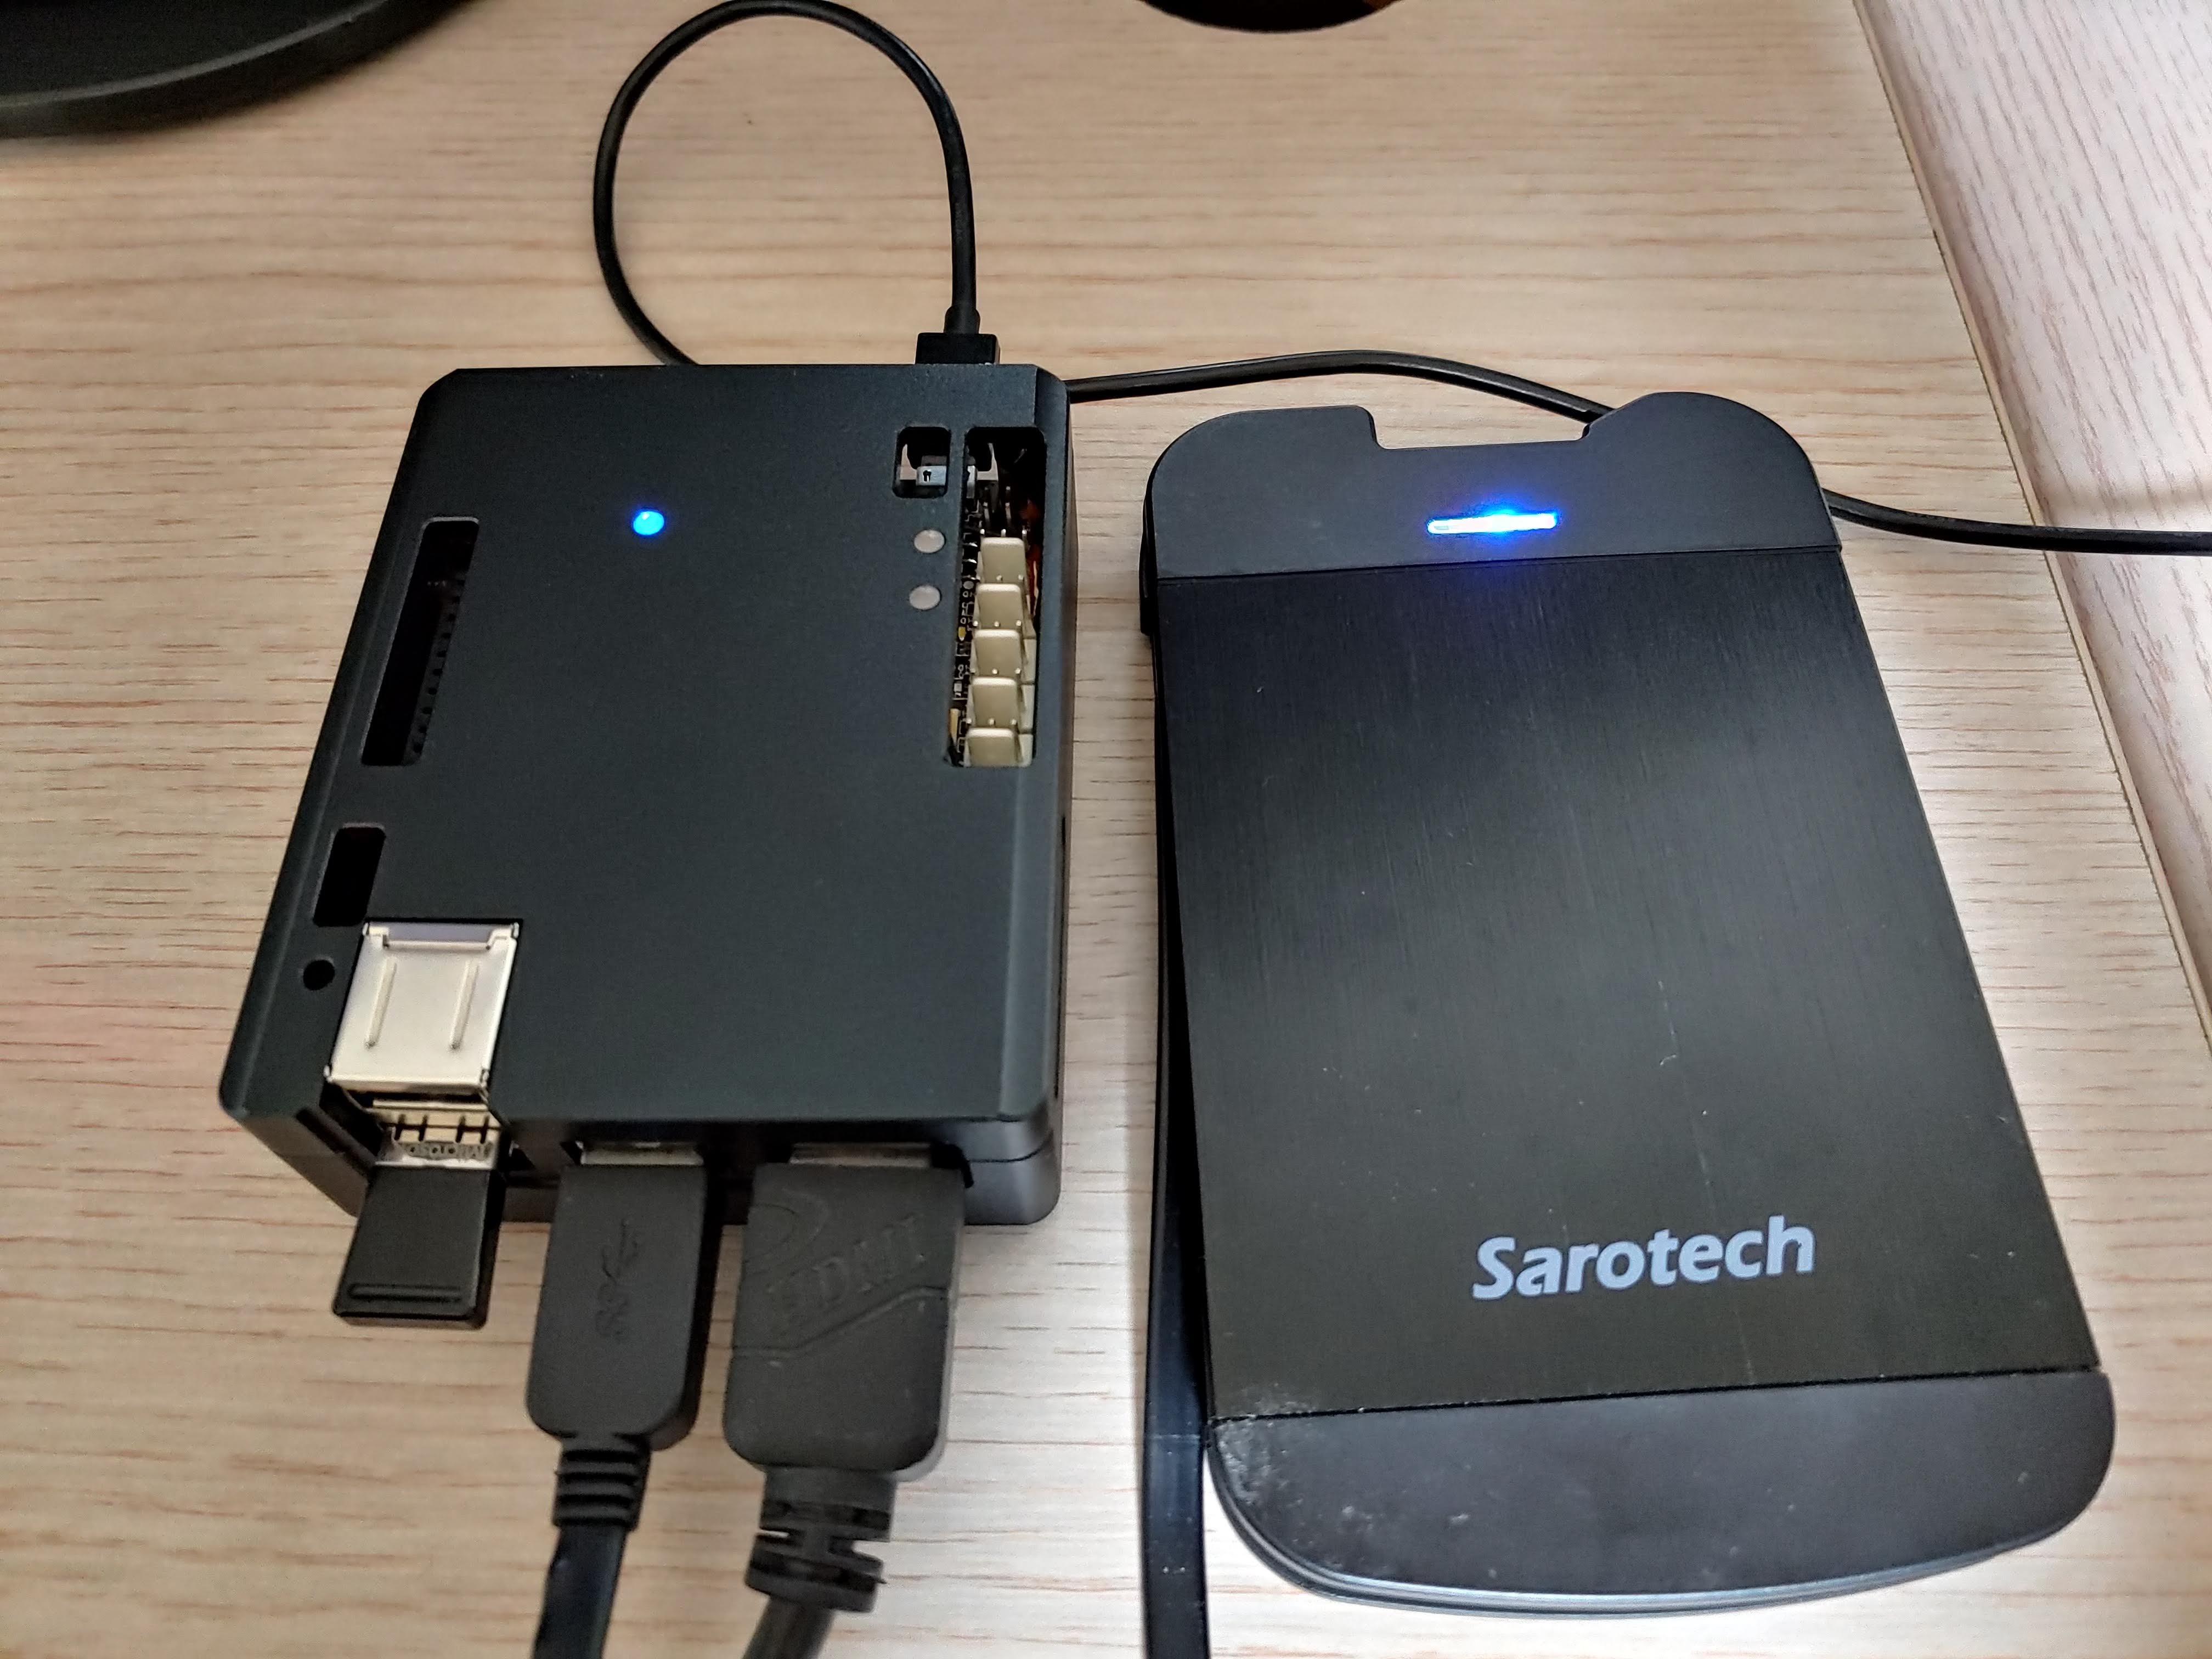 LattePanda with external USB SSD attached